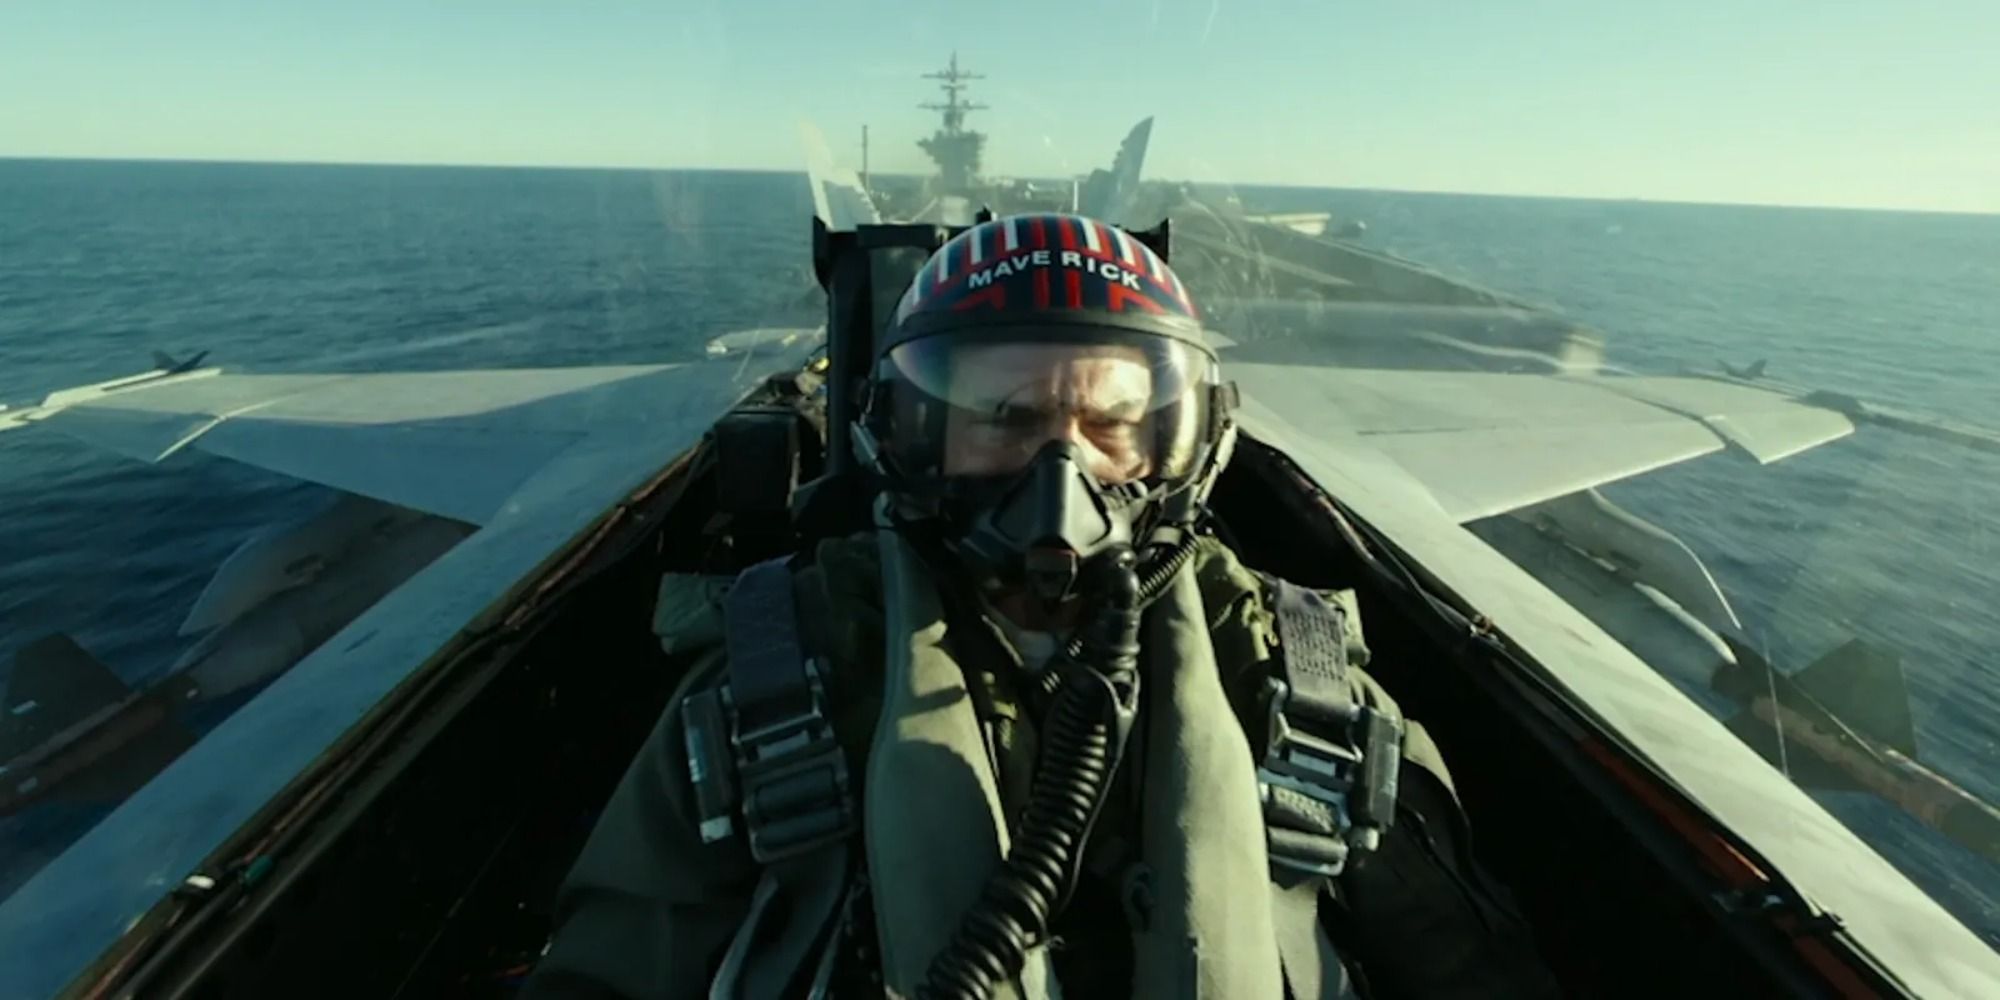 Maverick in the cockpit flying an F-14